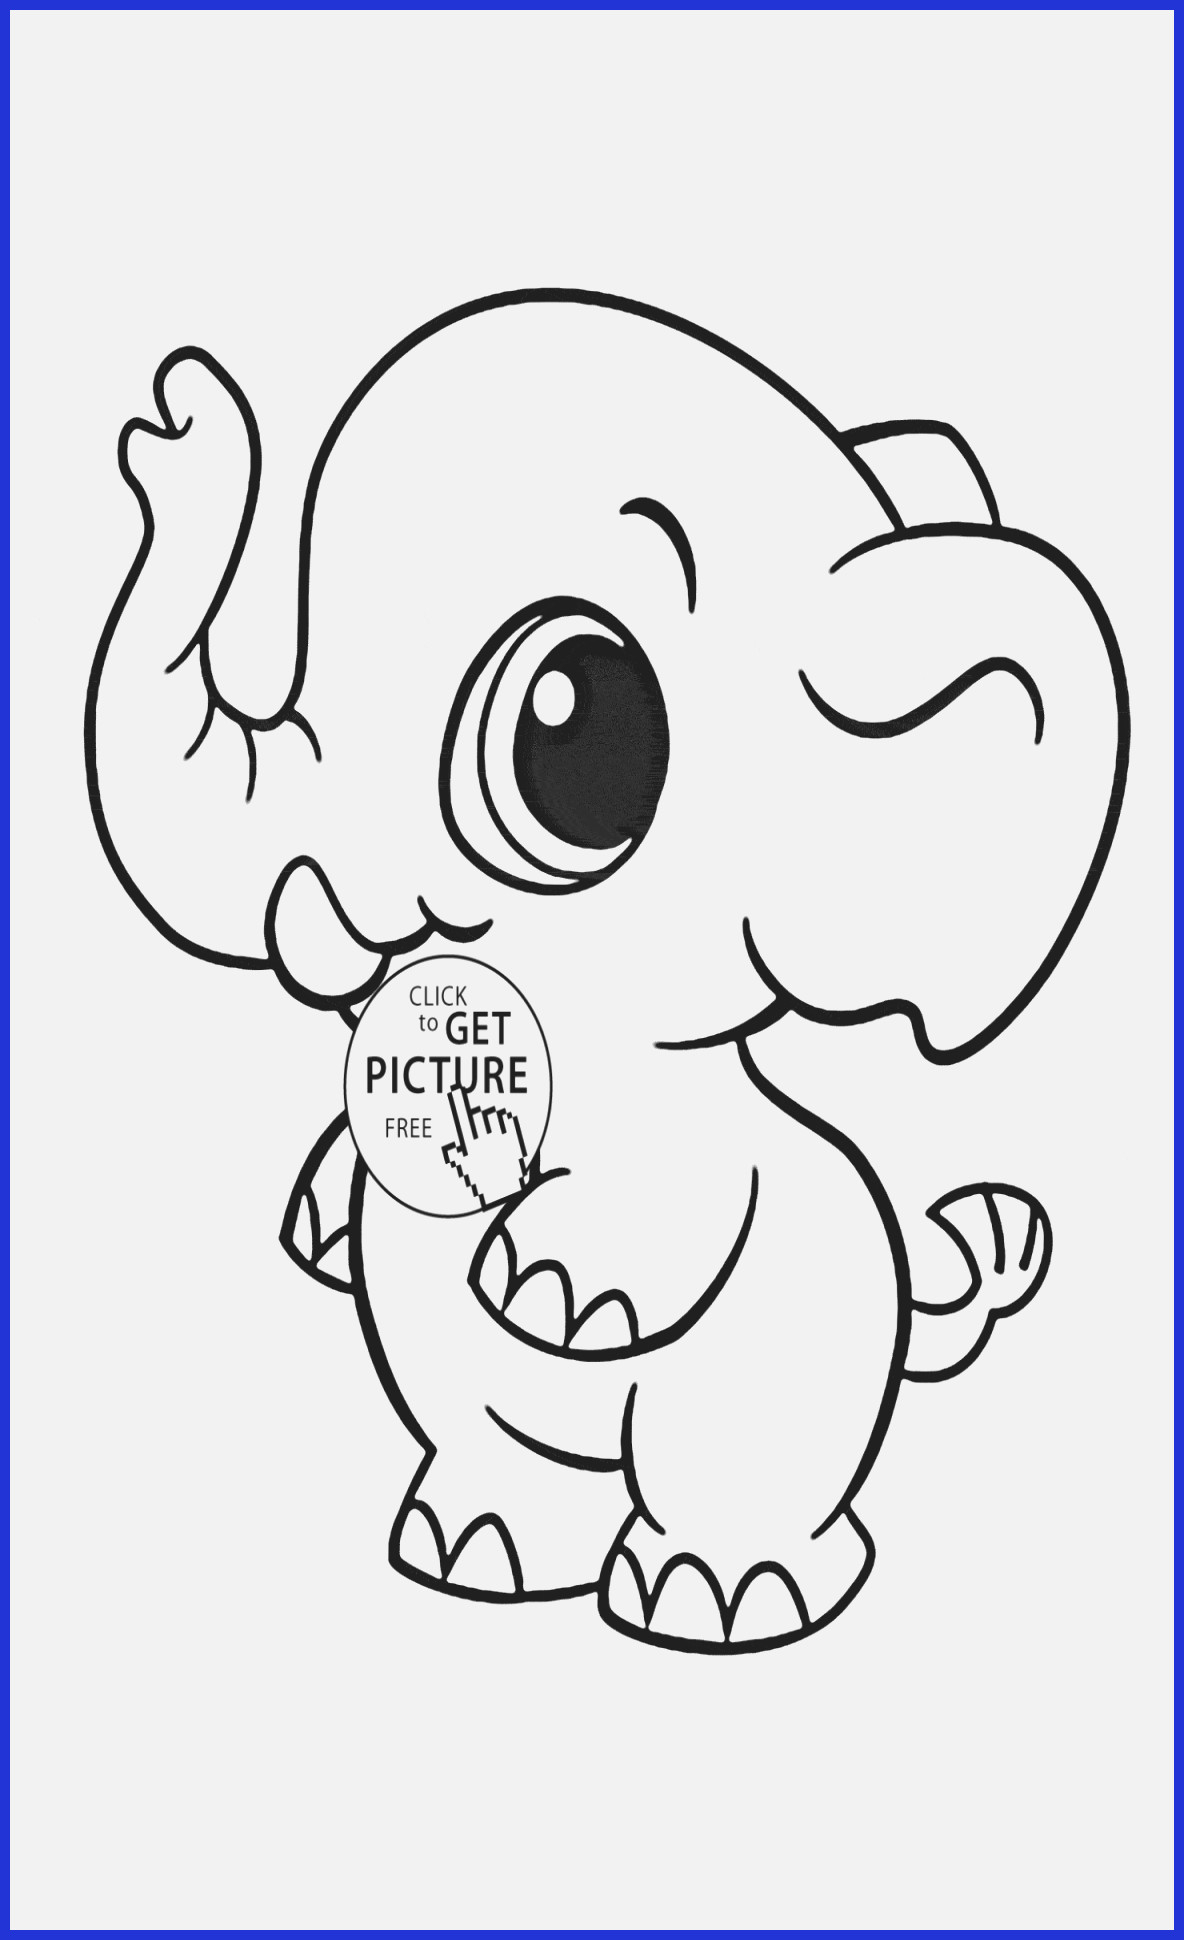 Elmer Fudd Coloring Pages Coloring Book Bunny Wwwgsfl